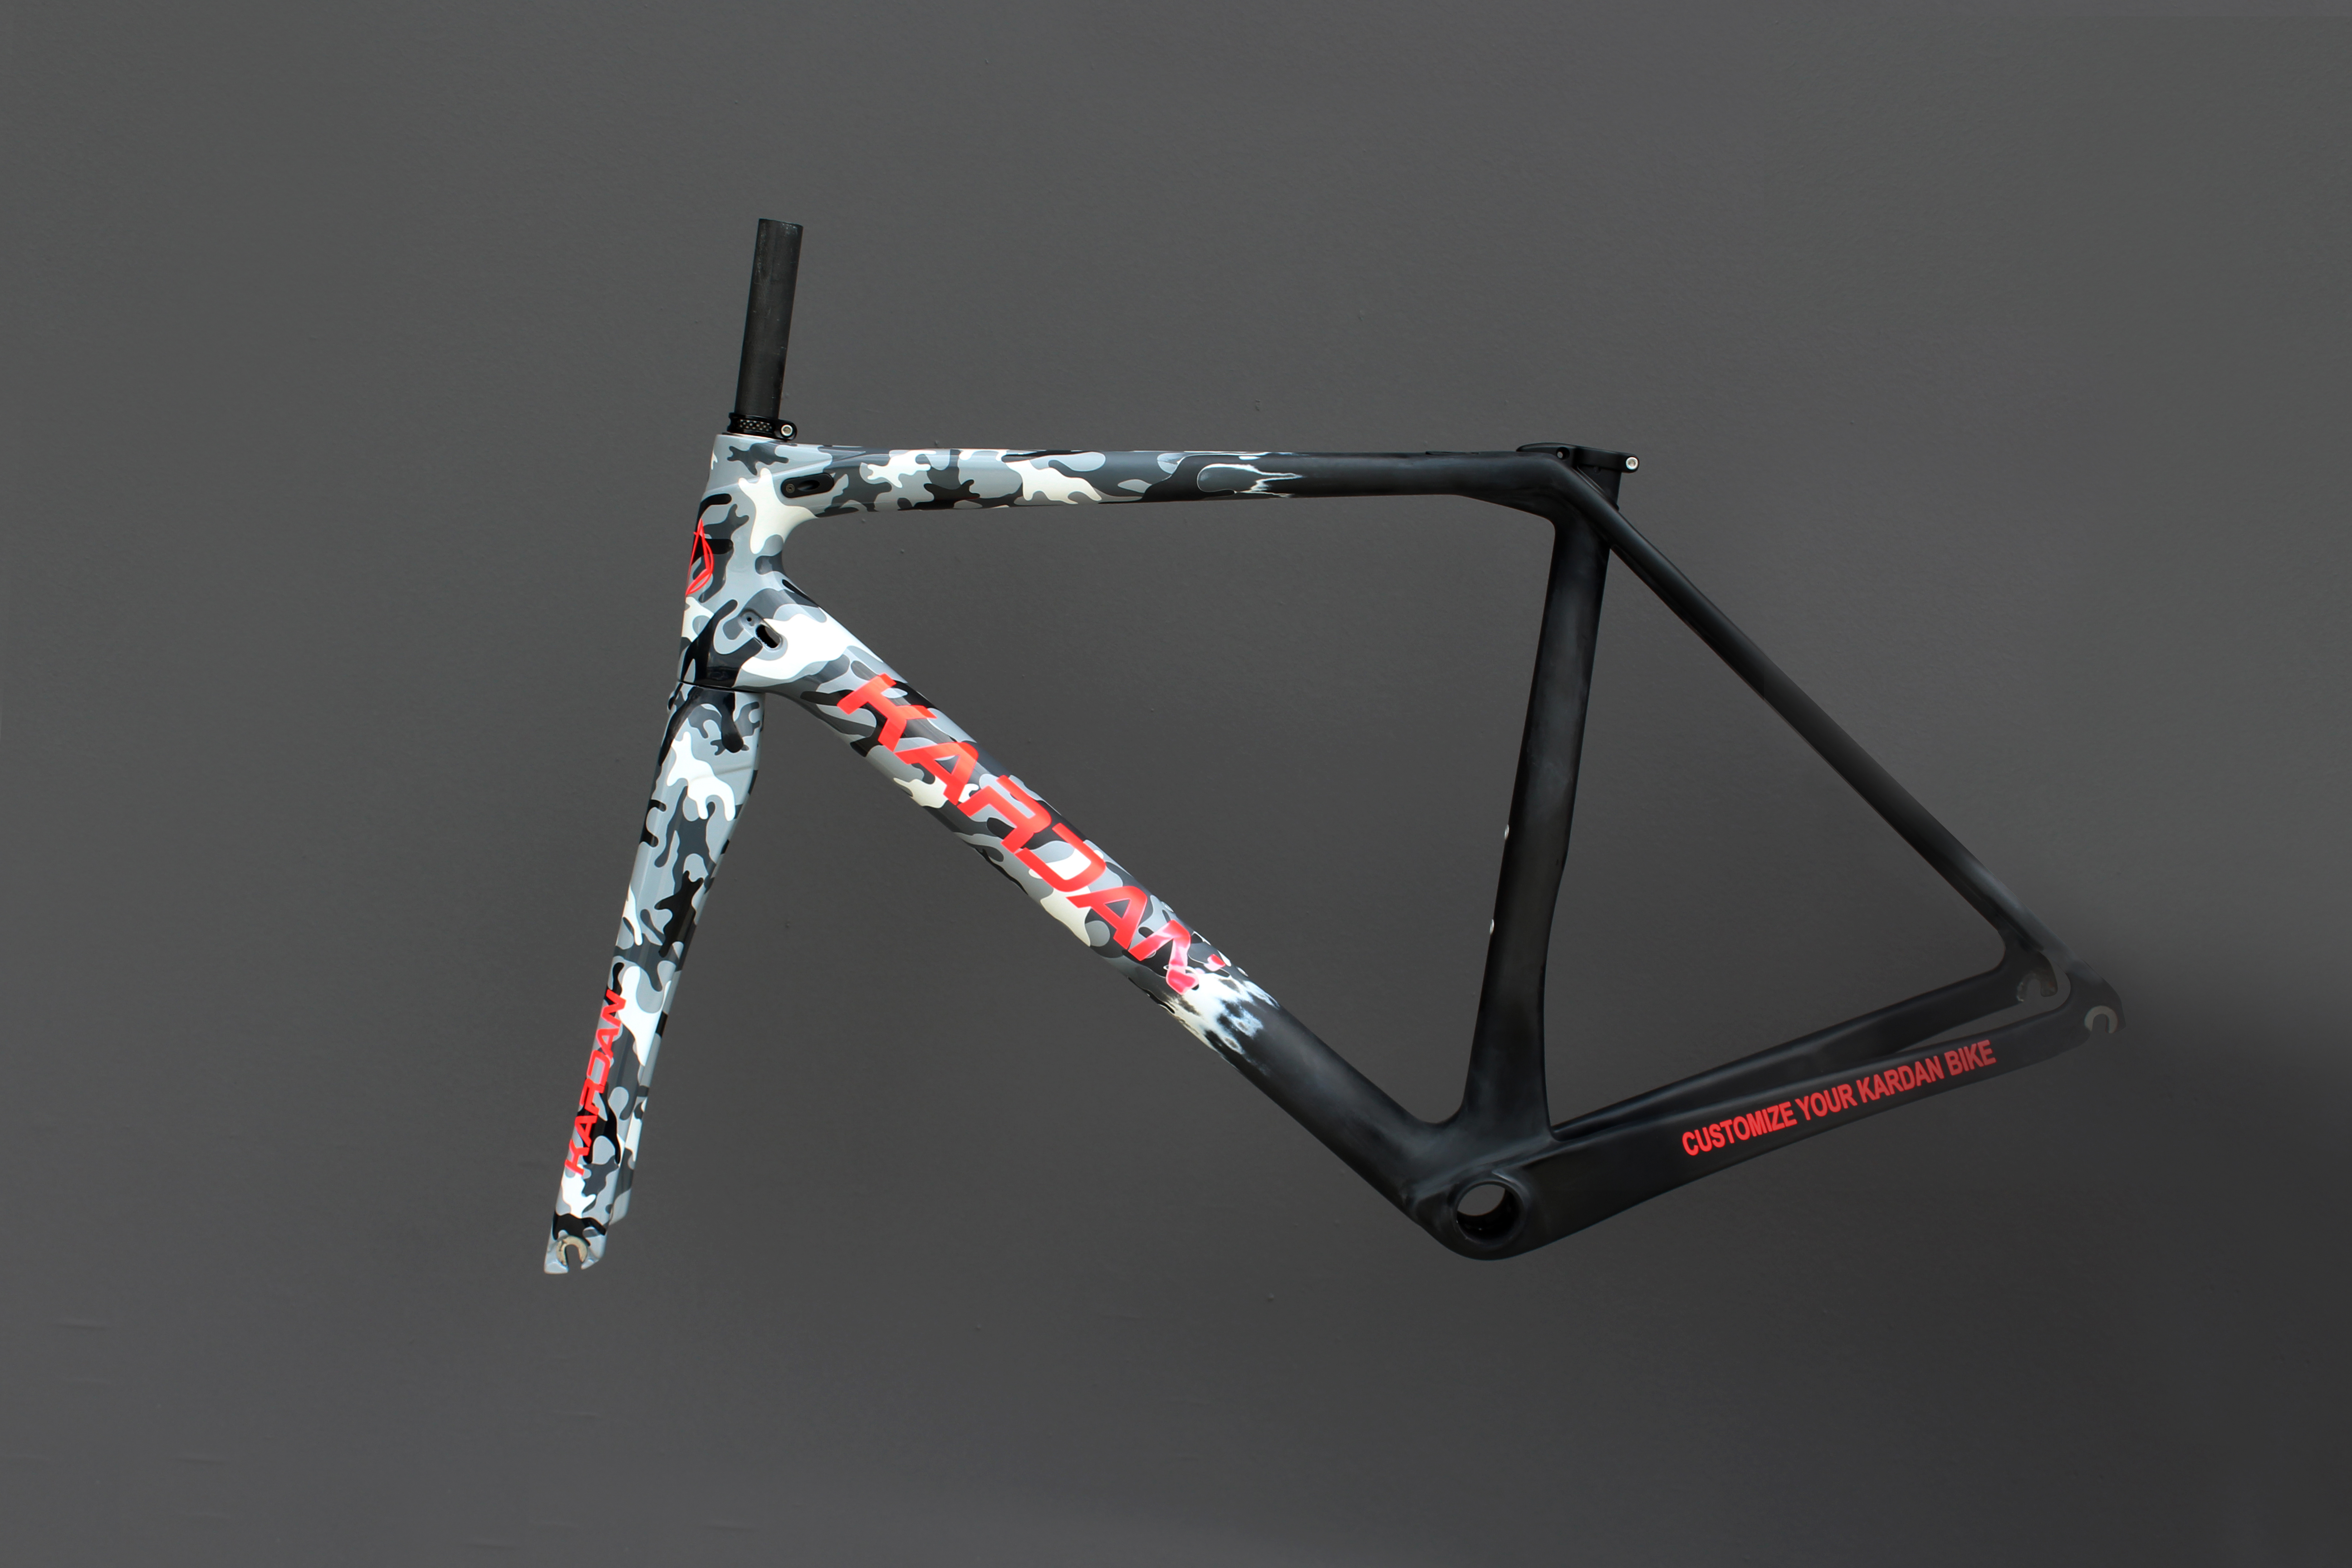 Personalize your bike with Italian bicycle frames!